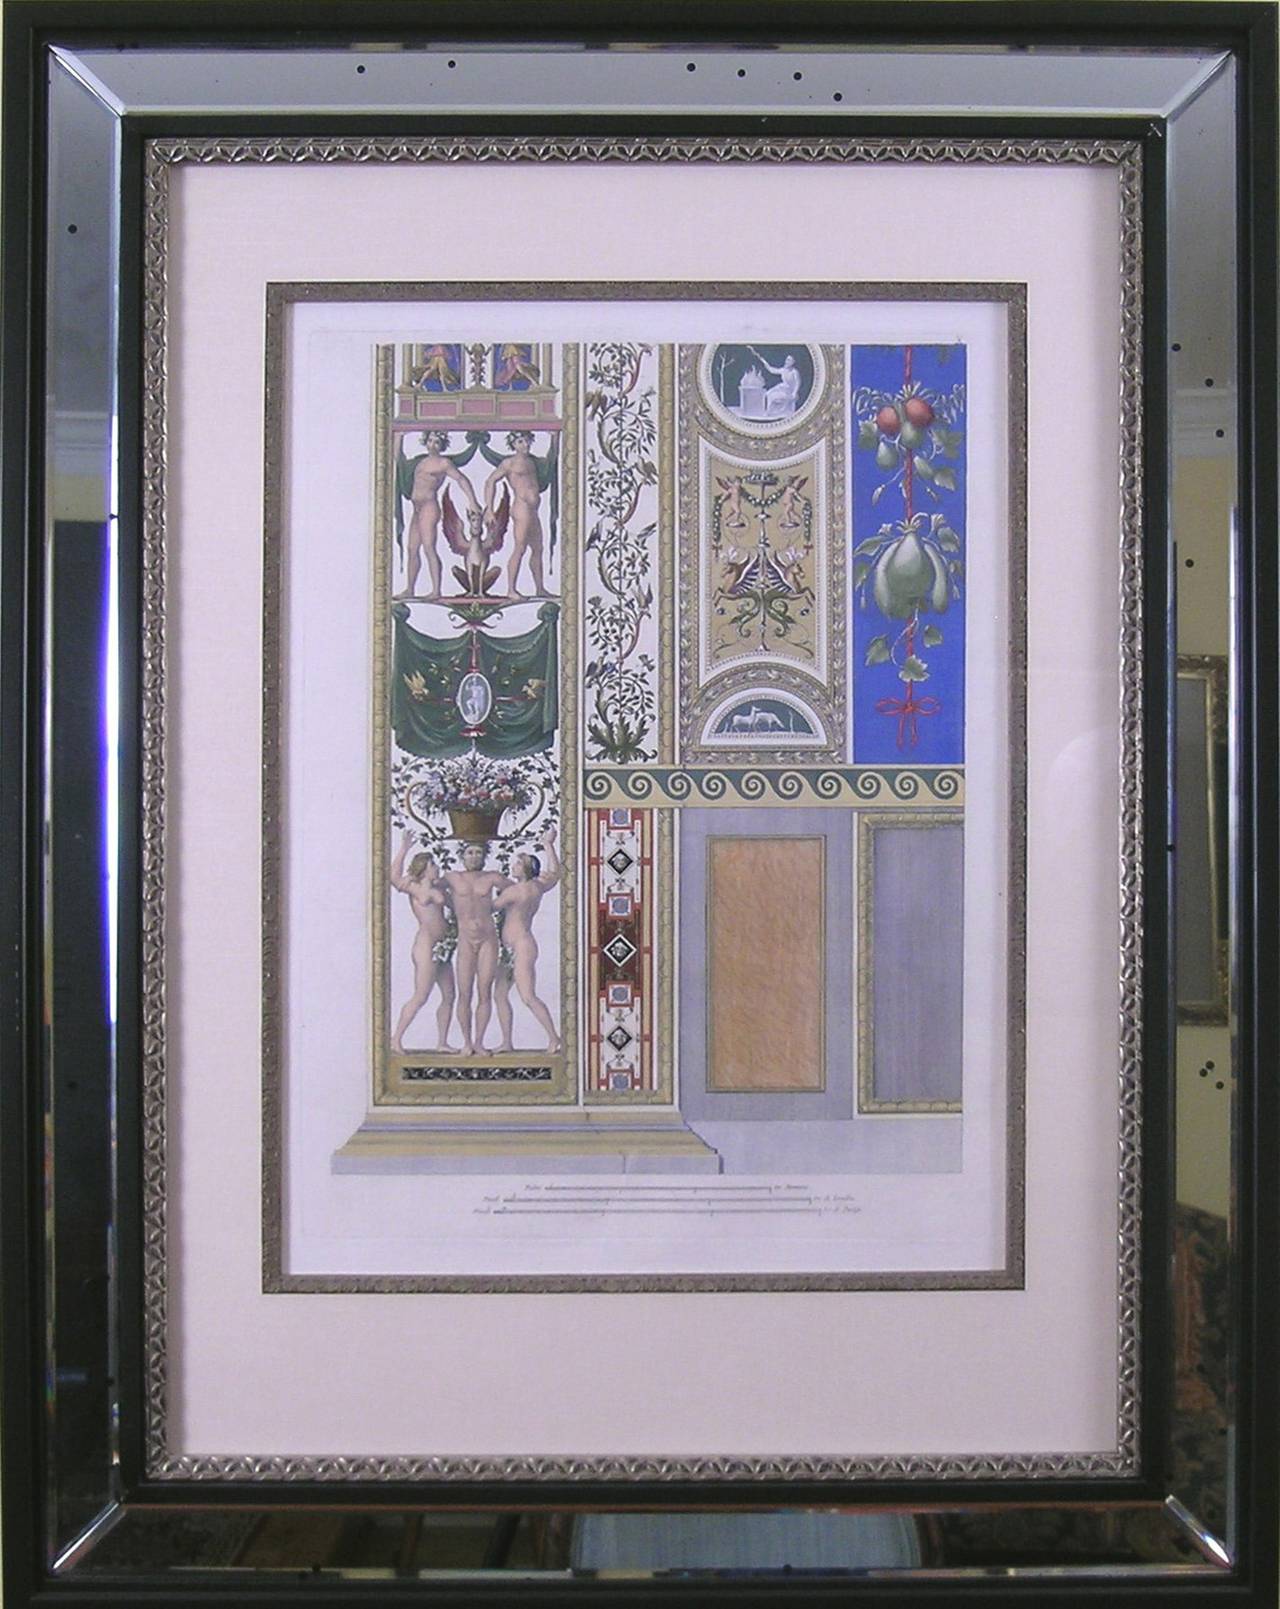 Raphael's Loggia.  Plate X.  Pilaster Bottom. Priced as a pair with Pilaster Top - Print by Gaetano Savorelli